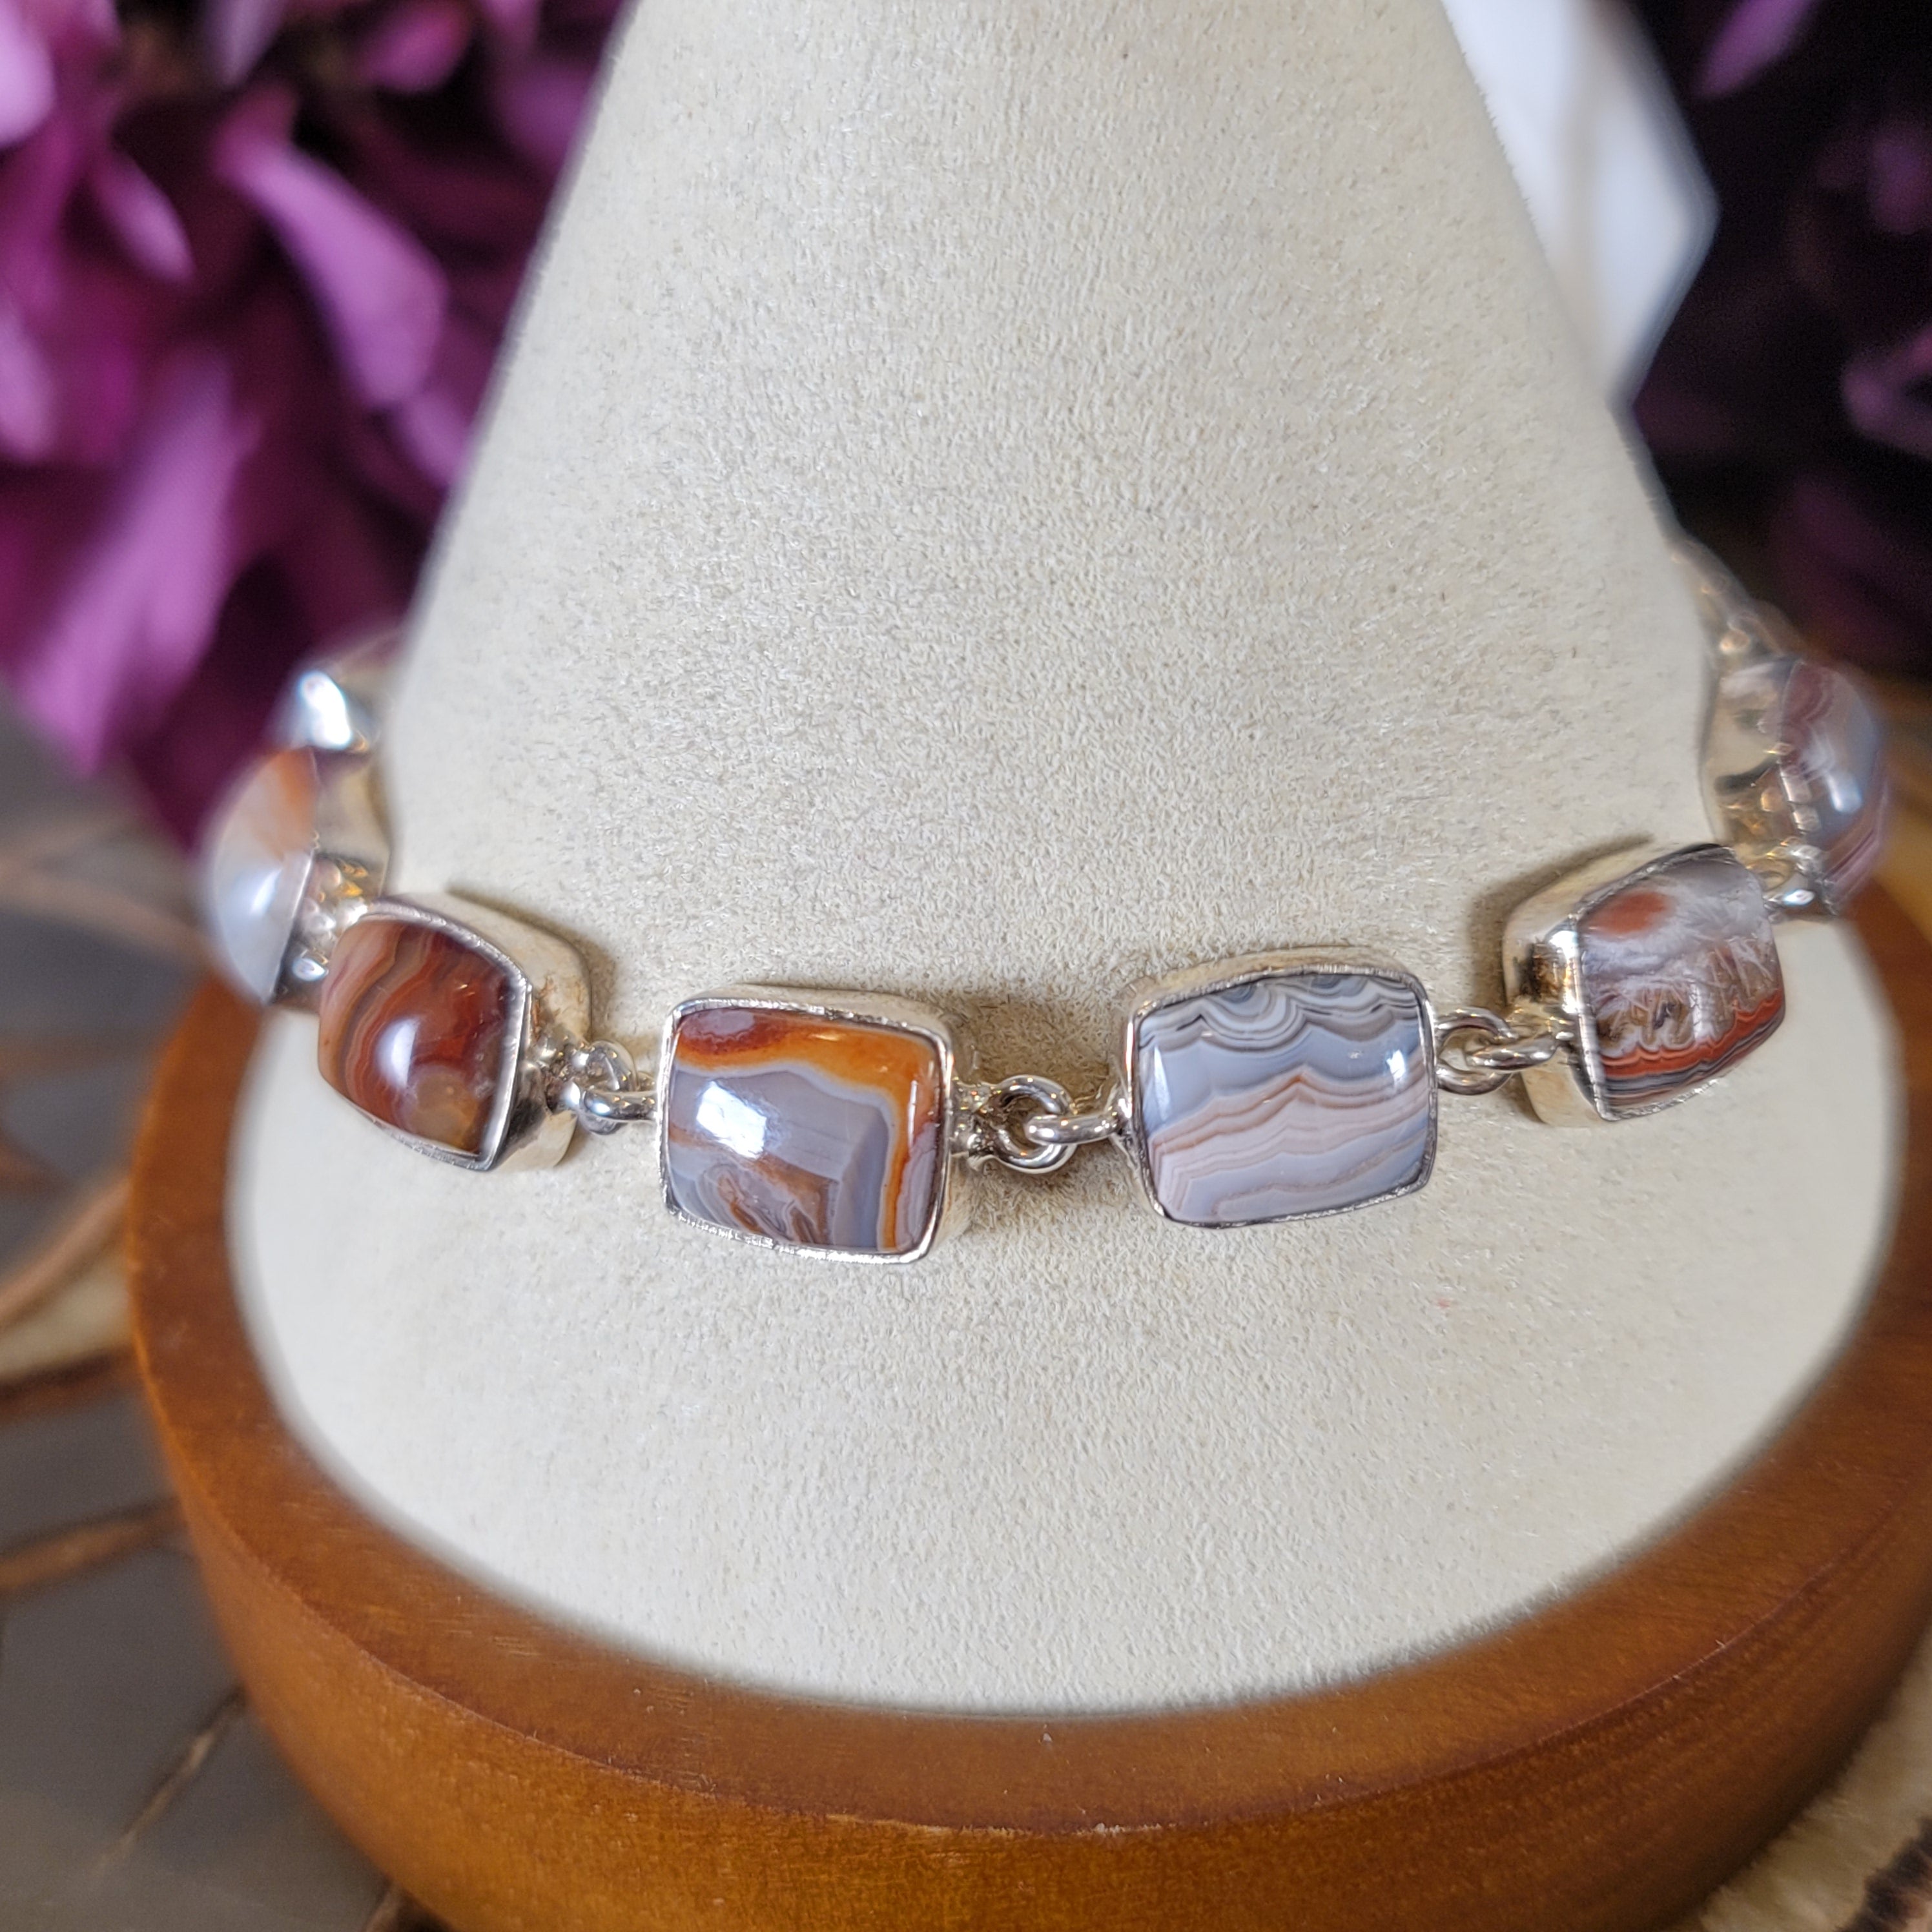 Crazy Lace Agate Bracelet .925 Silver for Joy and Laughter